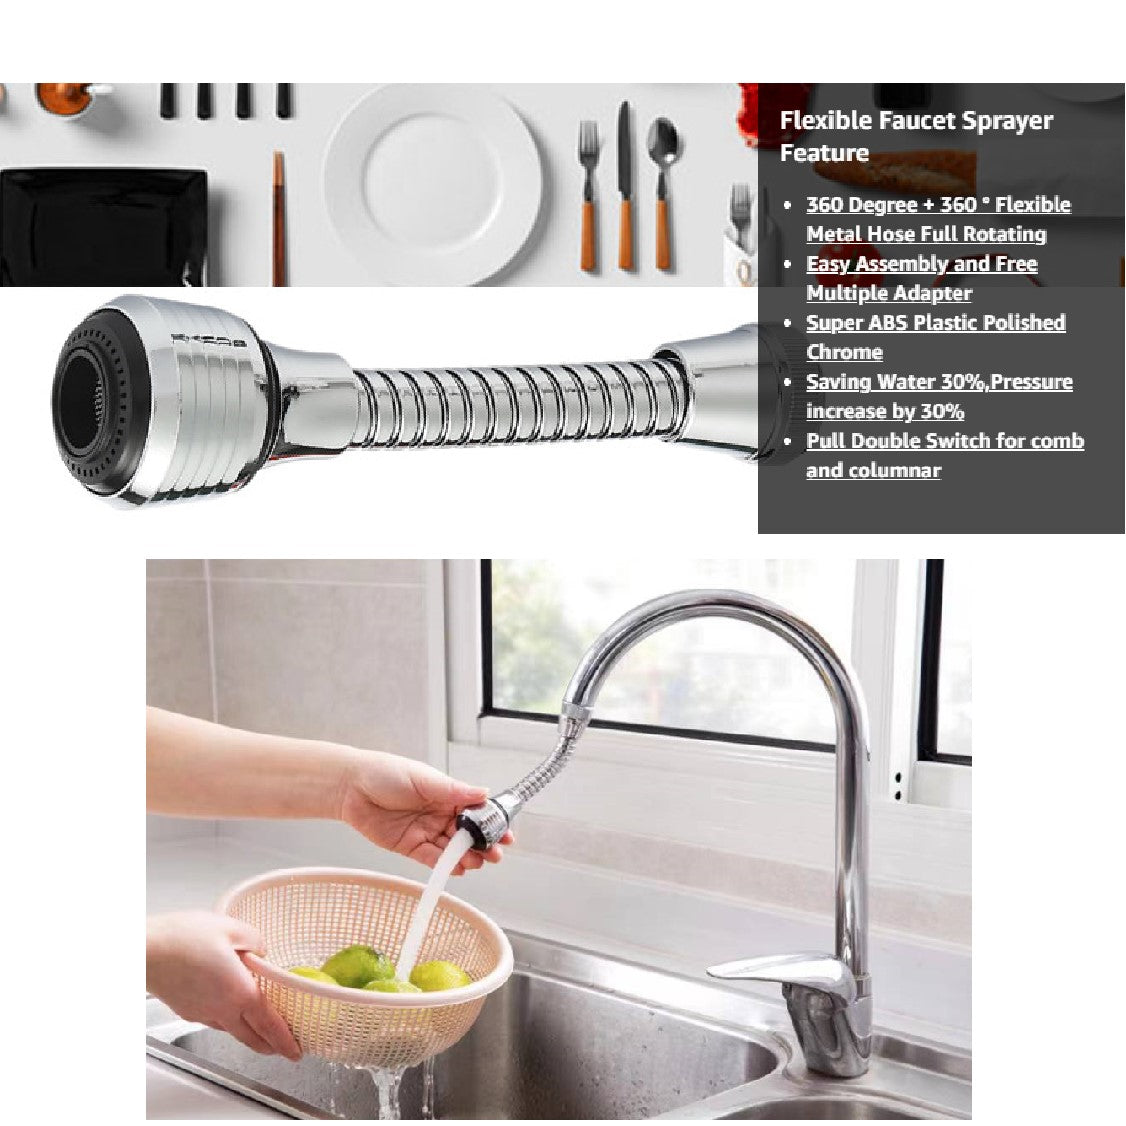 Faucet Extender With Universal Adapter Kits - Referdeal